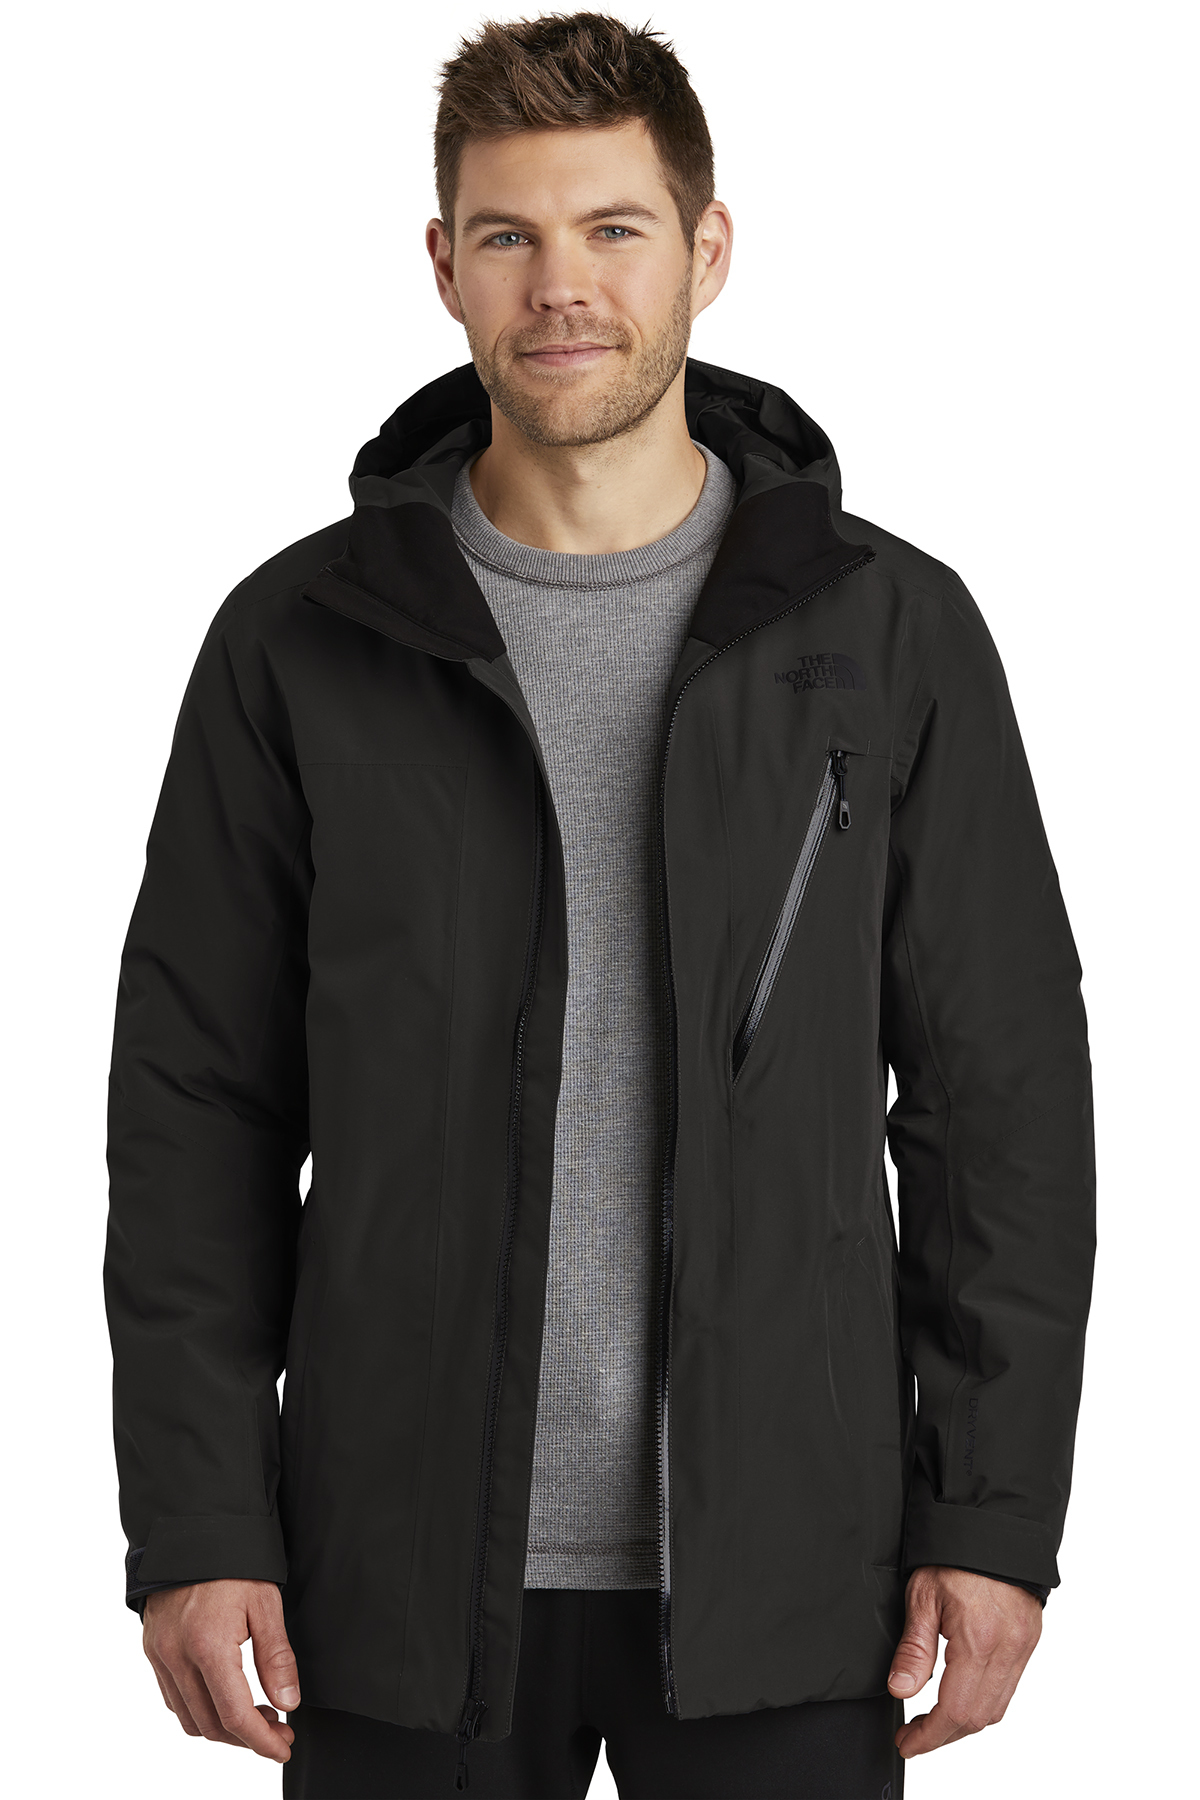 north face waterproof insulated jacket